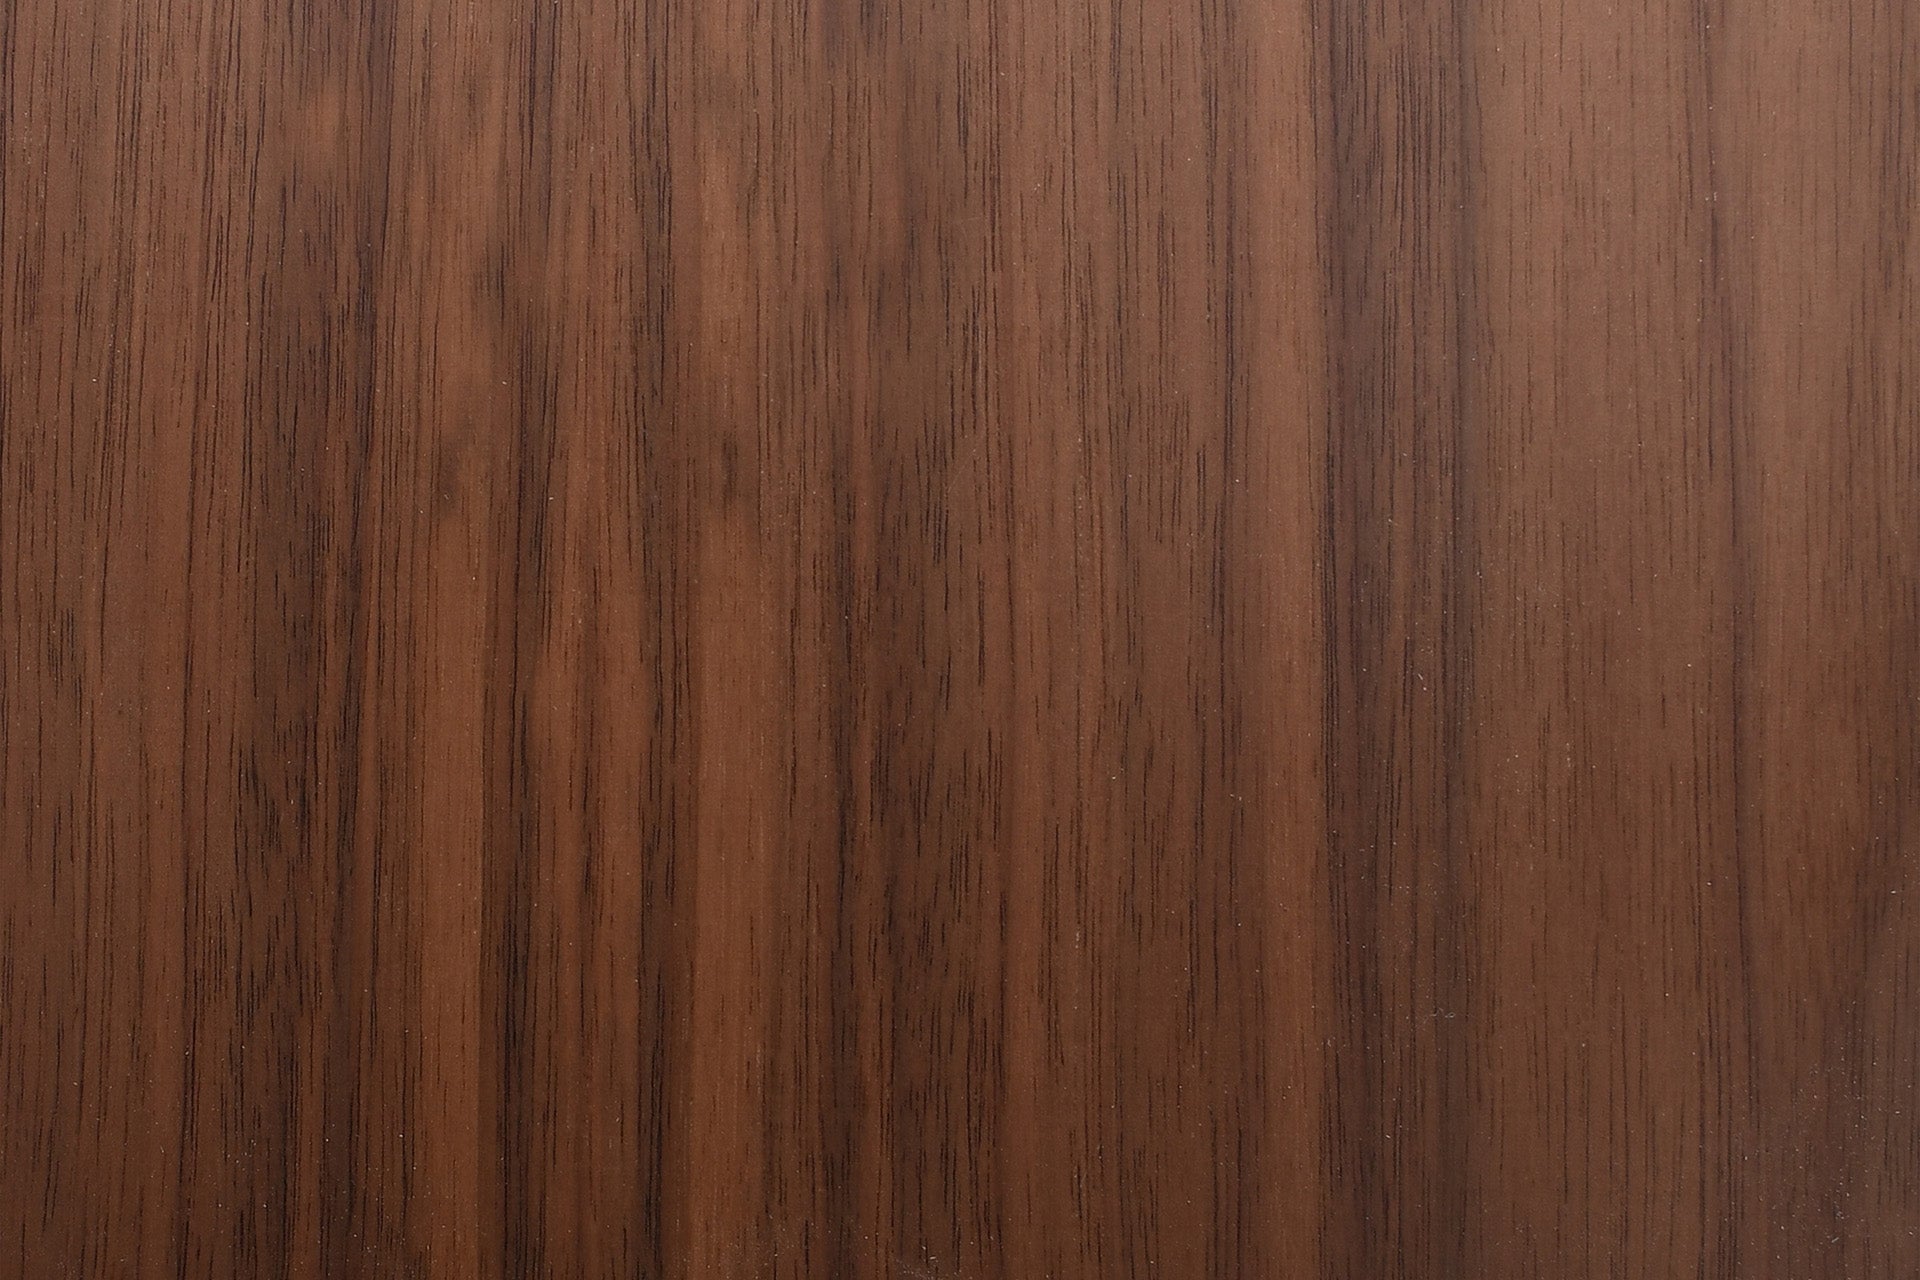 Walnut veneer plywood with clear lacquer finish